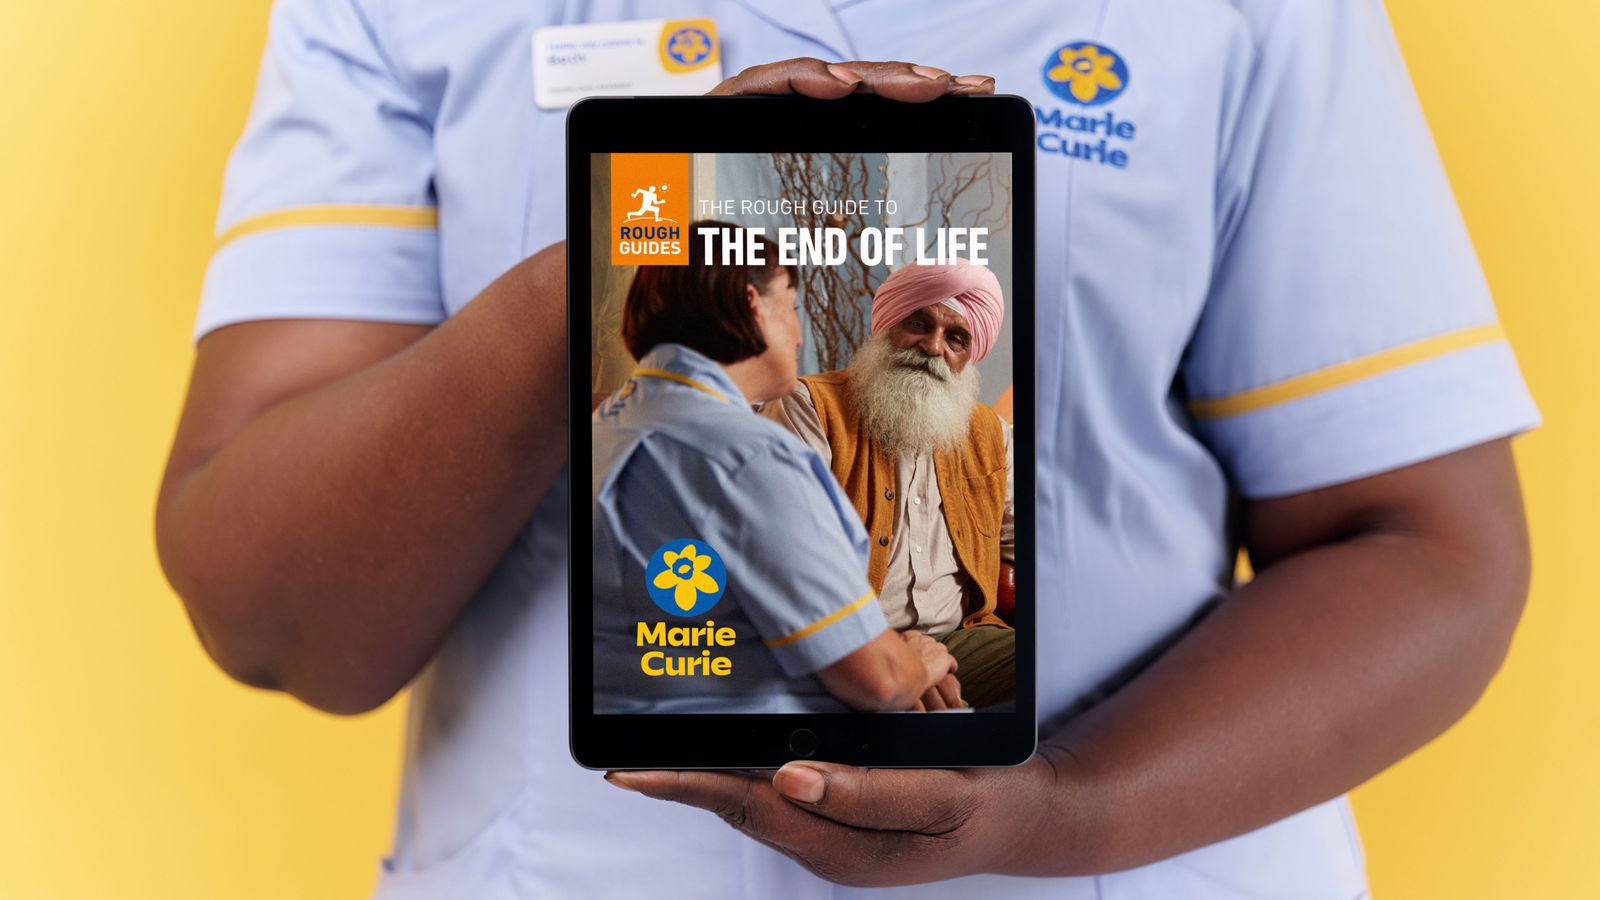 Rough Guides partners with Marie Curie to publish 'end-of-life journey' guidebook